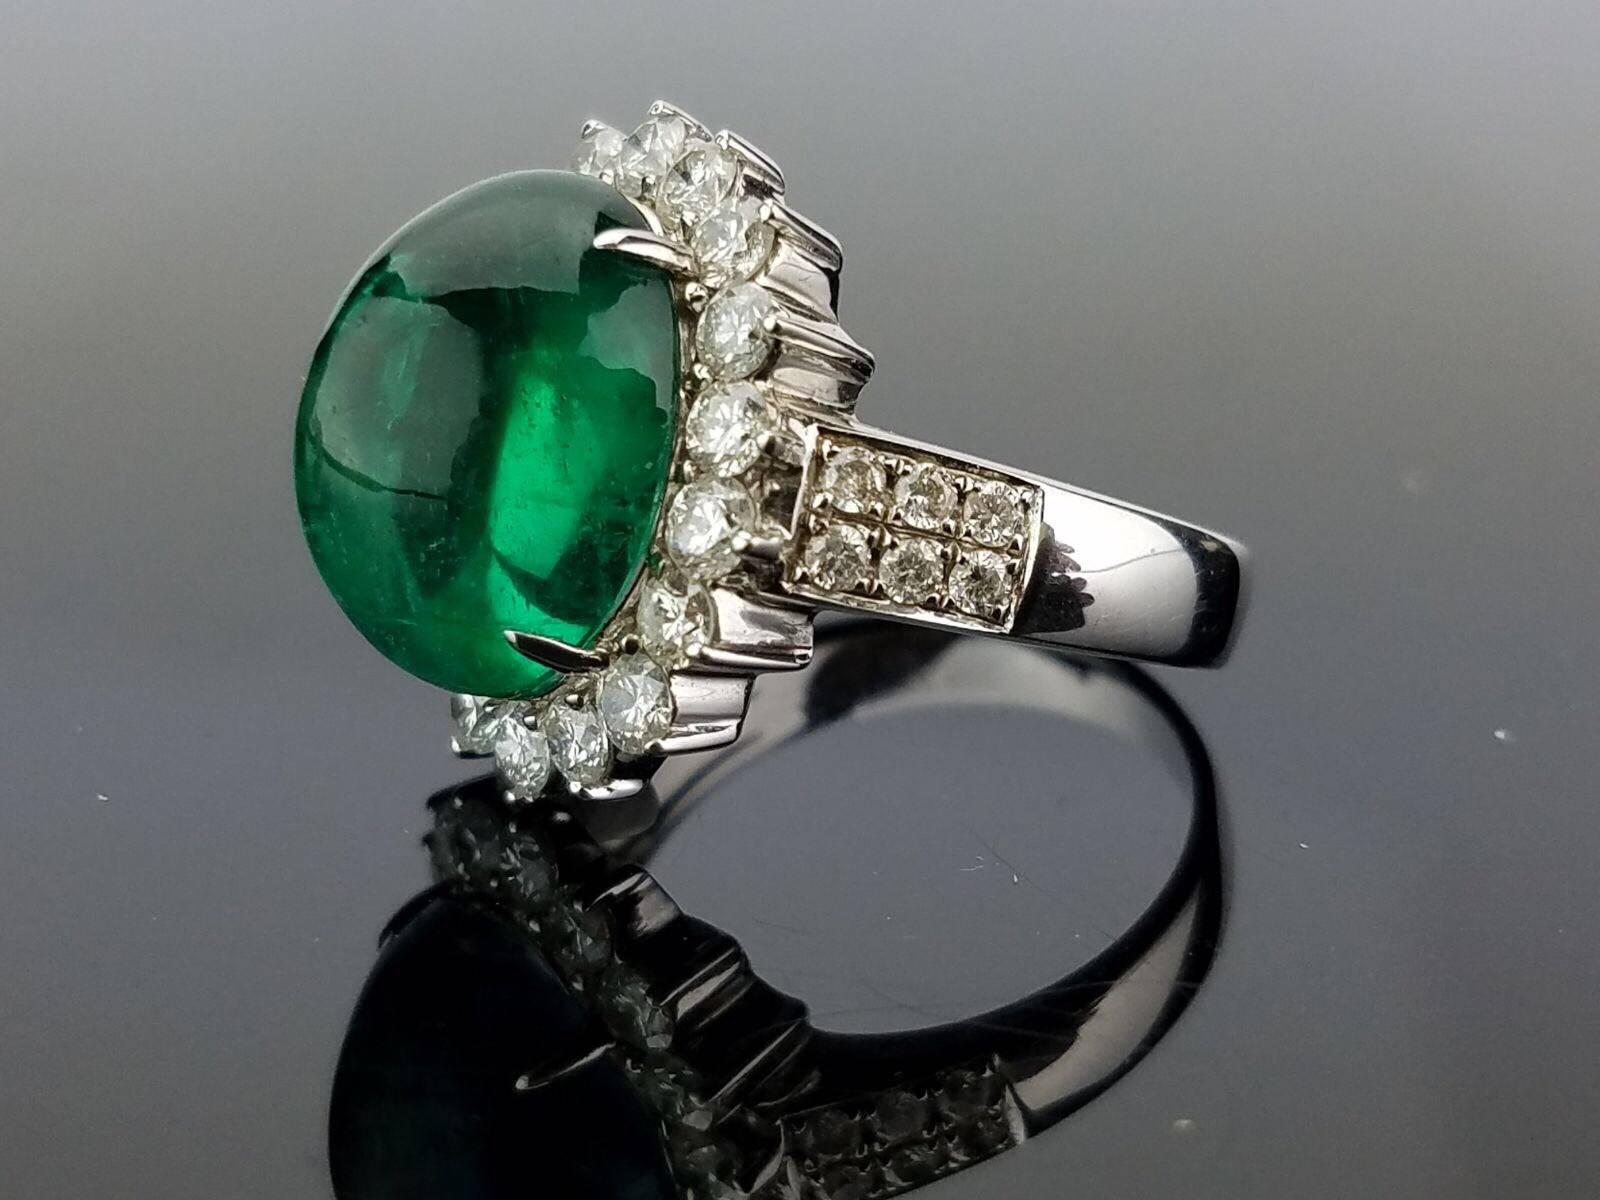 A very elegant Zambian Emerald cabochon of good quality and beautiful colour, and White Diamond cocktail ring, all set 18K white gold. 

Stone Details: 
Stone: Zambian Emerald
Carat Weight: 8.35 Carat

Diamond Details:
Total Carat Weight: 1.43